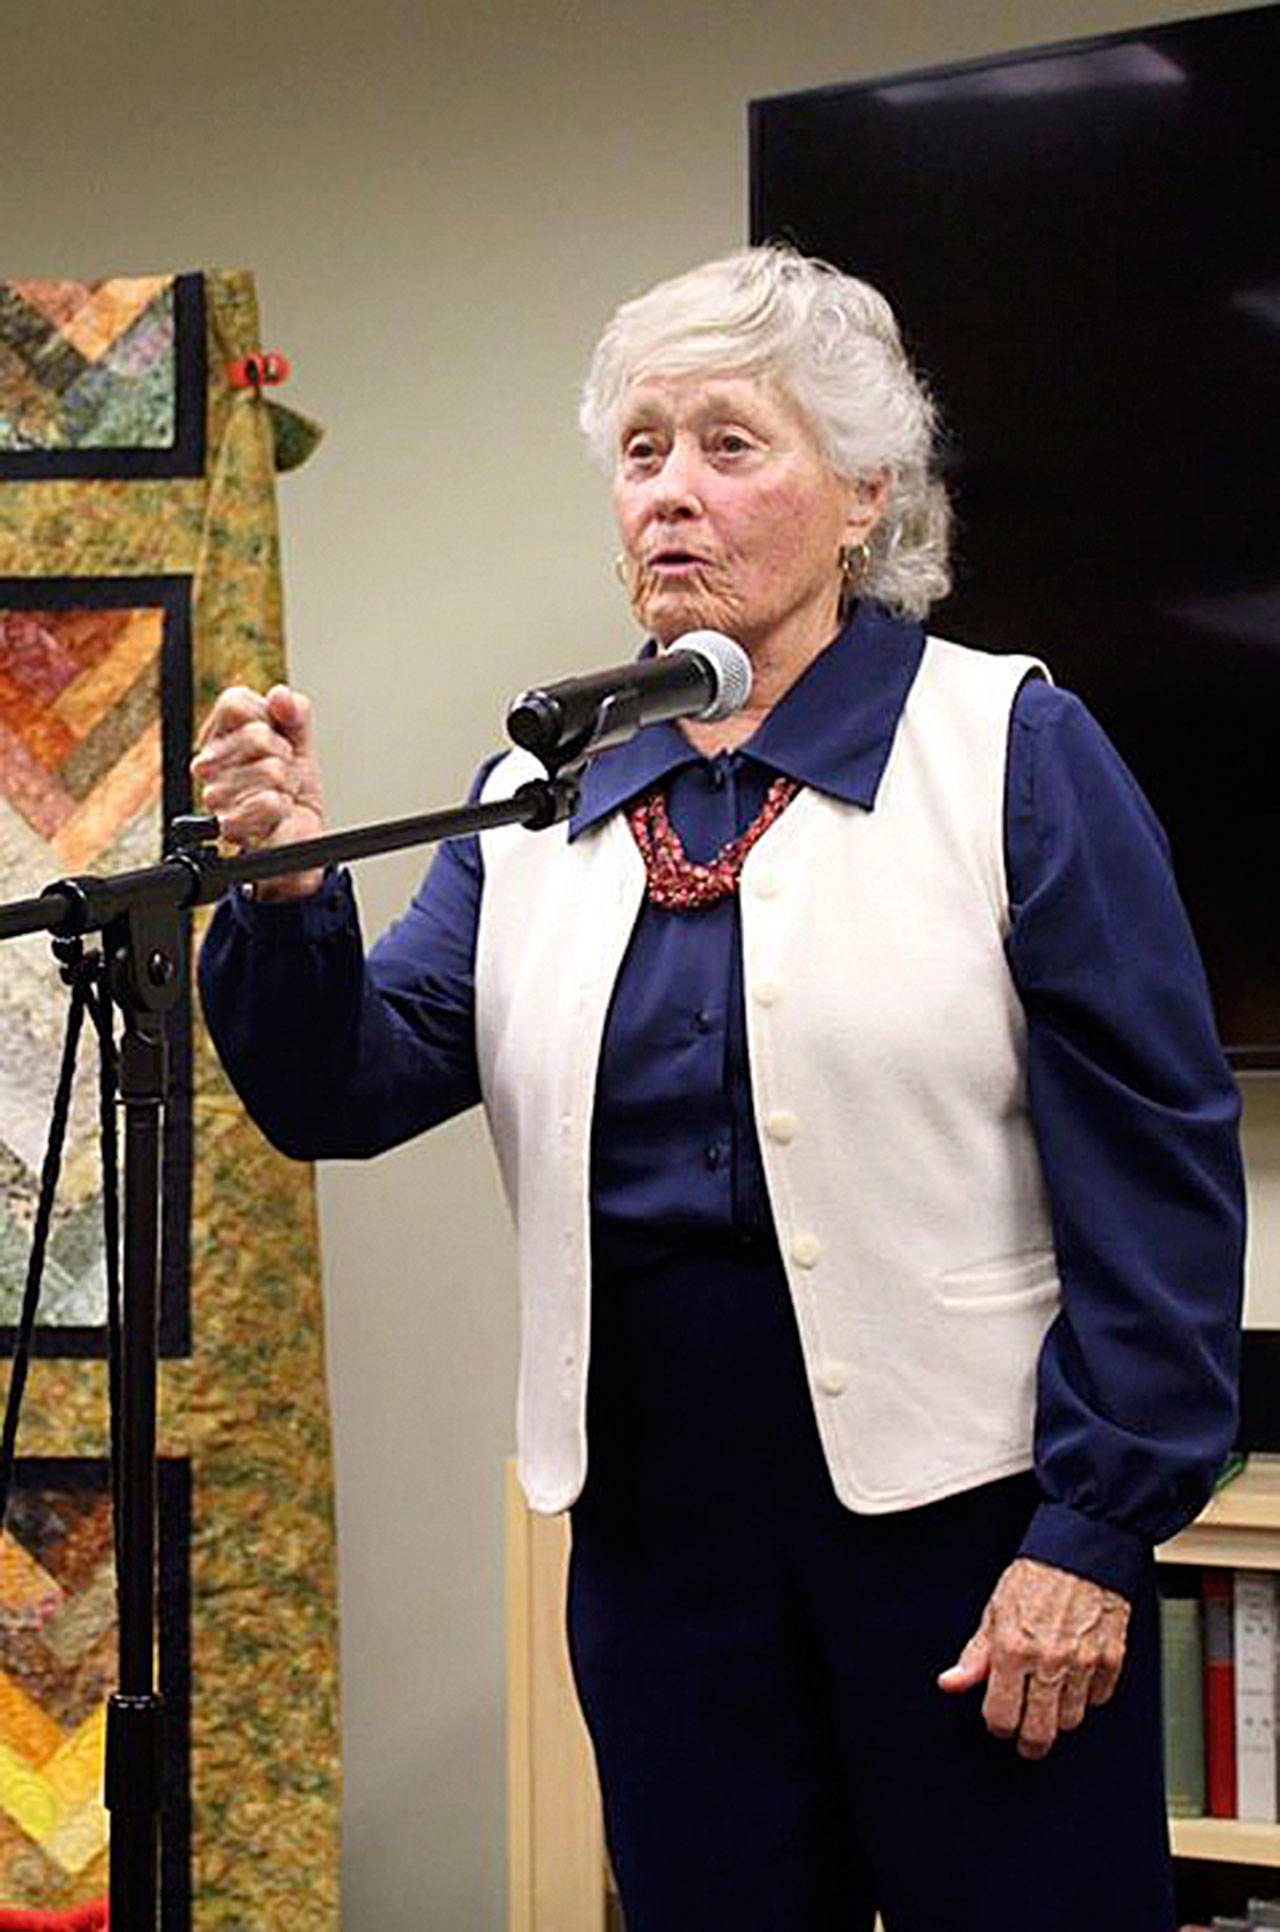 Well-traveled storyteller Alice Susong will, along with her husband, Dunbar, step up as featured performer in the Story Swap at the Port Angeles Library on Tuesday.